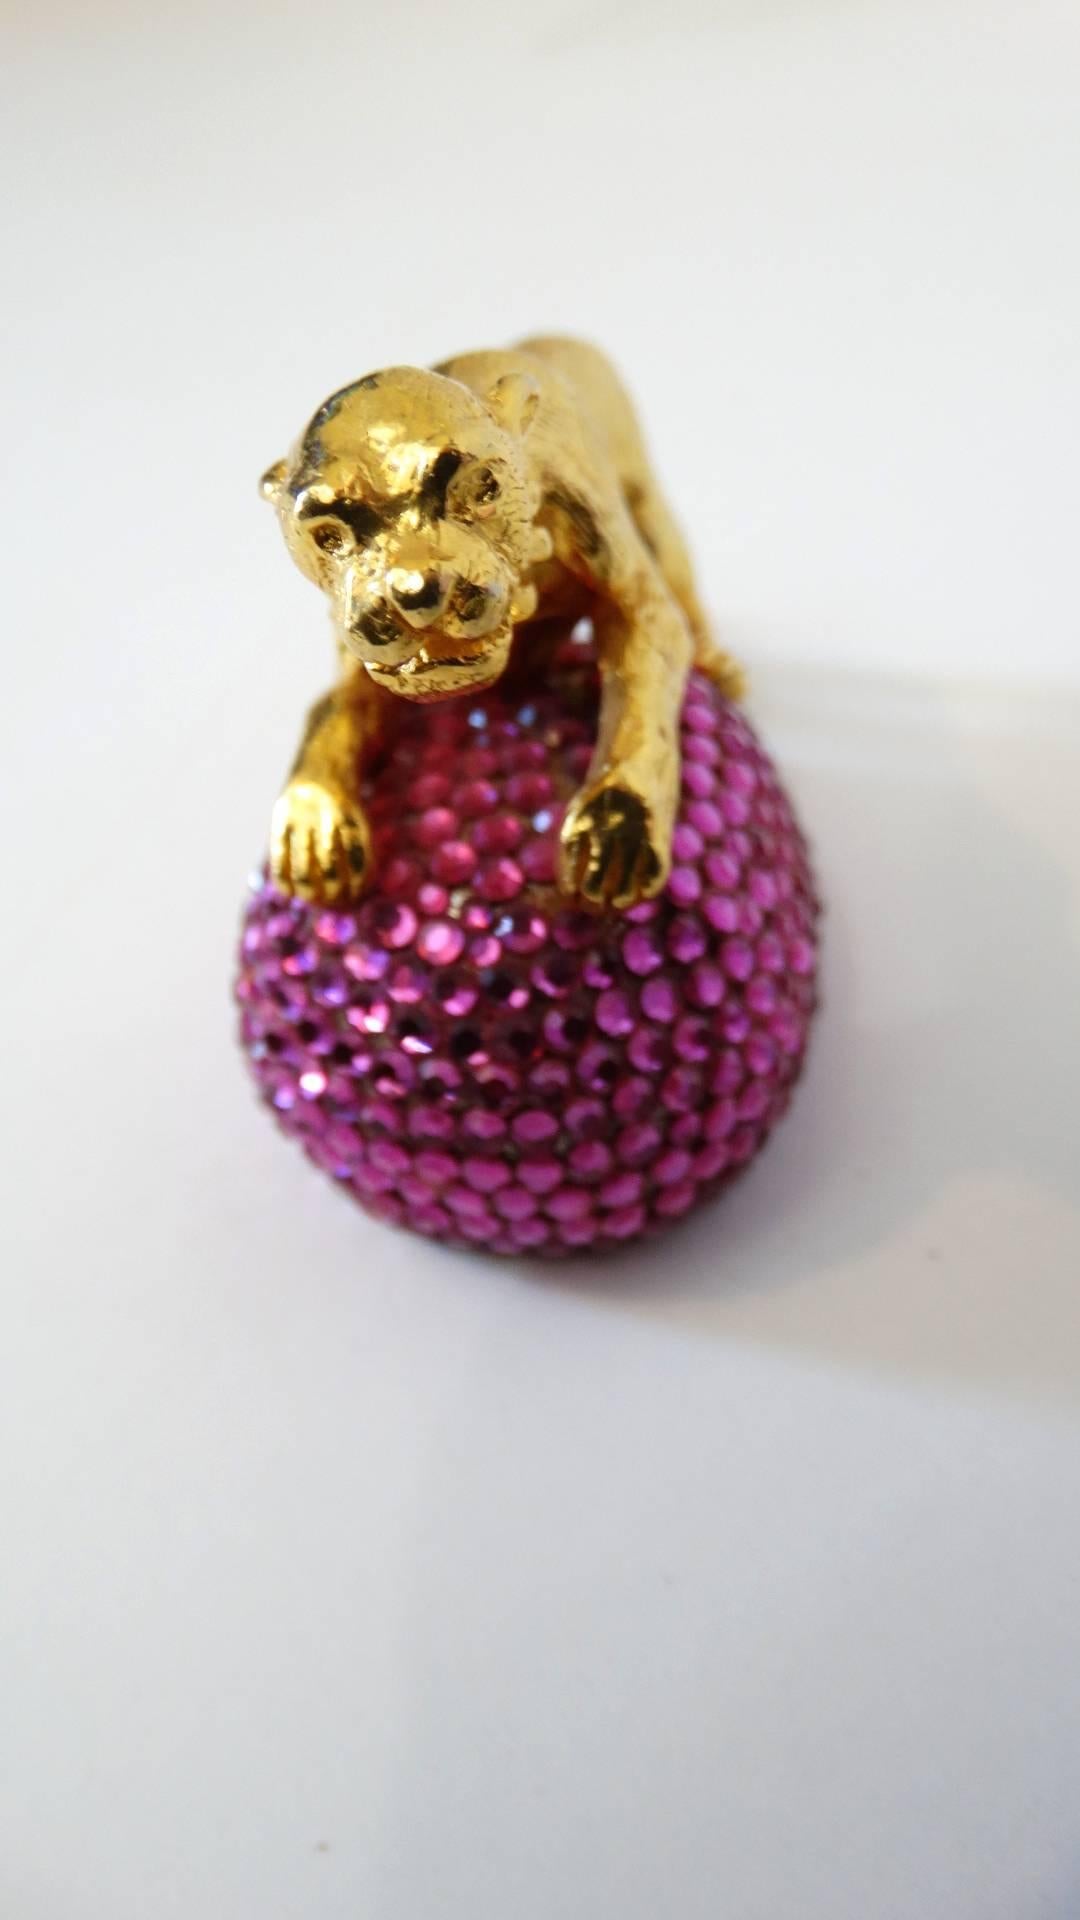 Extremely rare 1980's Judith Leiber Tiger vanity objet d'art . Gold plated hardware, with an encrusted Austrian Swarovski Crystals base. We have 8 in stock , see our other listings. Colors pink, green, white, blue and bronze, Signed Judith Leiber